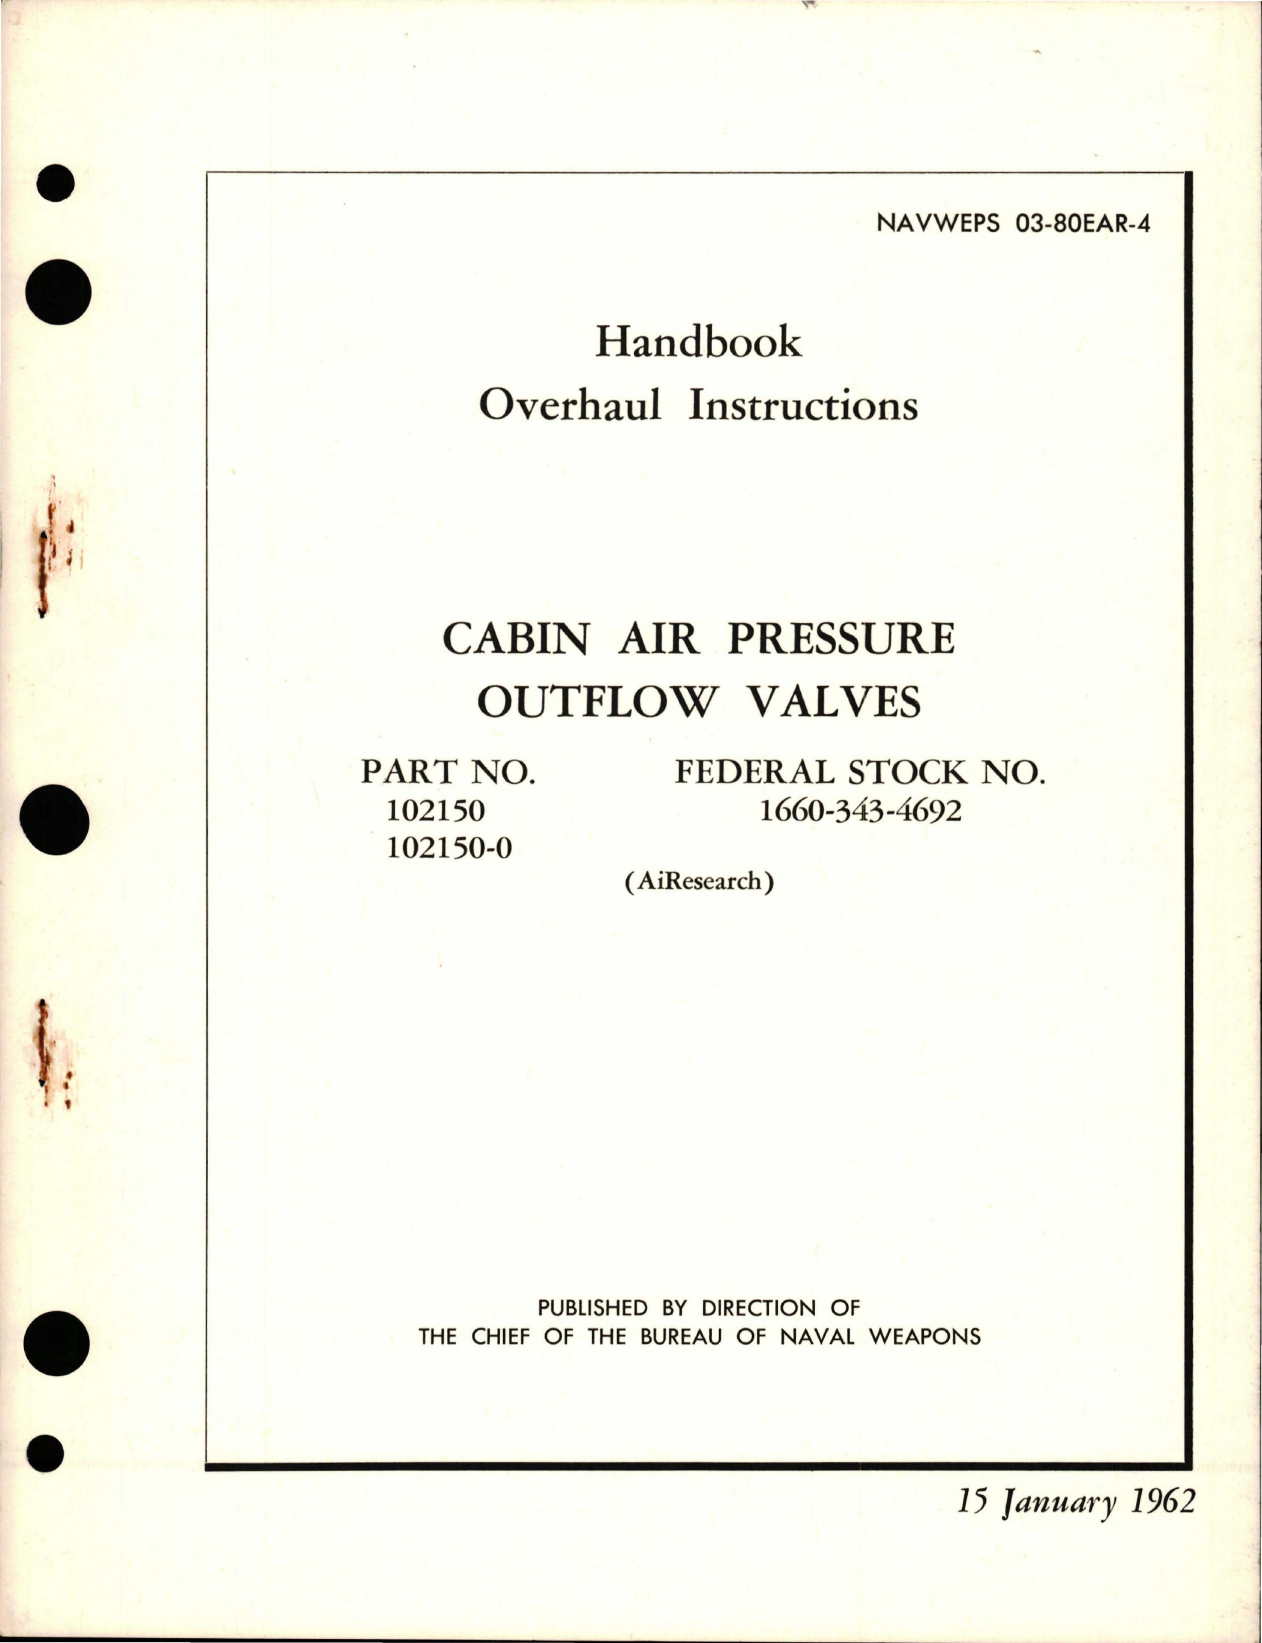 Sample page 1 from AirCorps Library document: Overhaul Instructions for Cabin Air Pressure Outflow Valves - Part 102150 and 102150-0